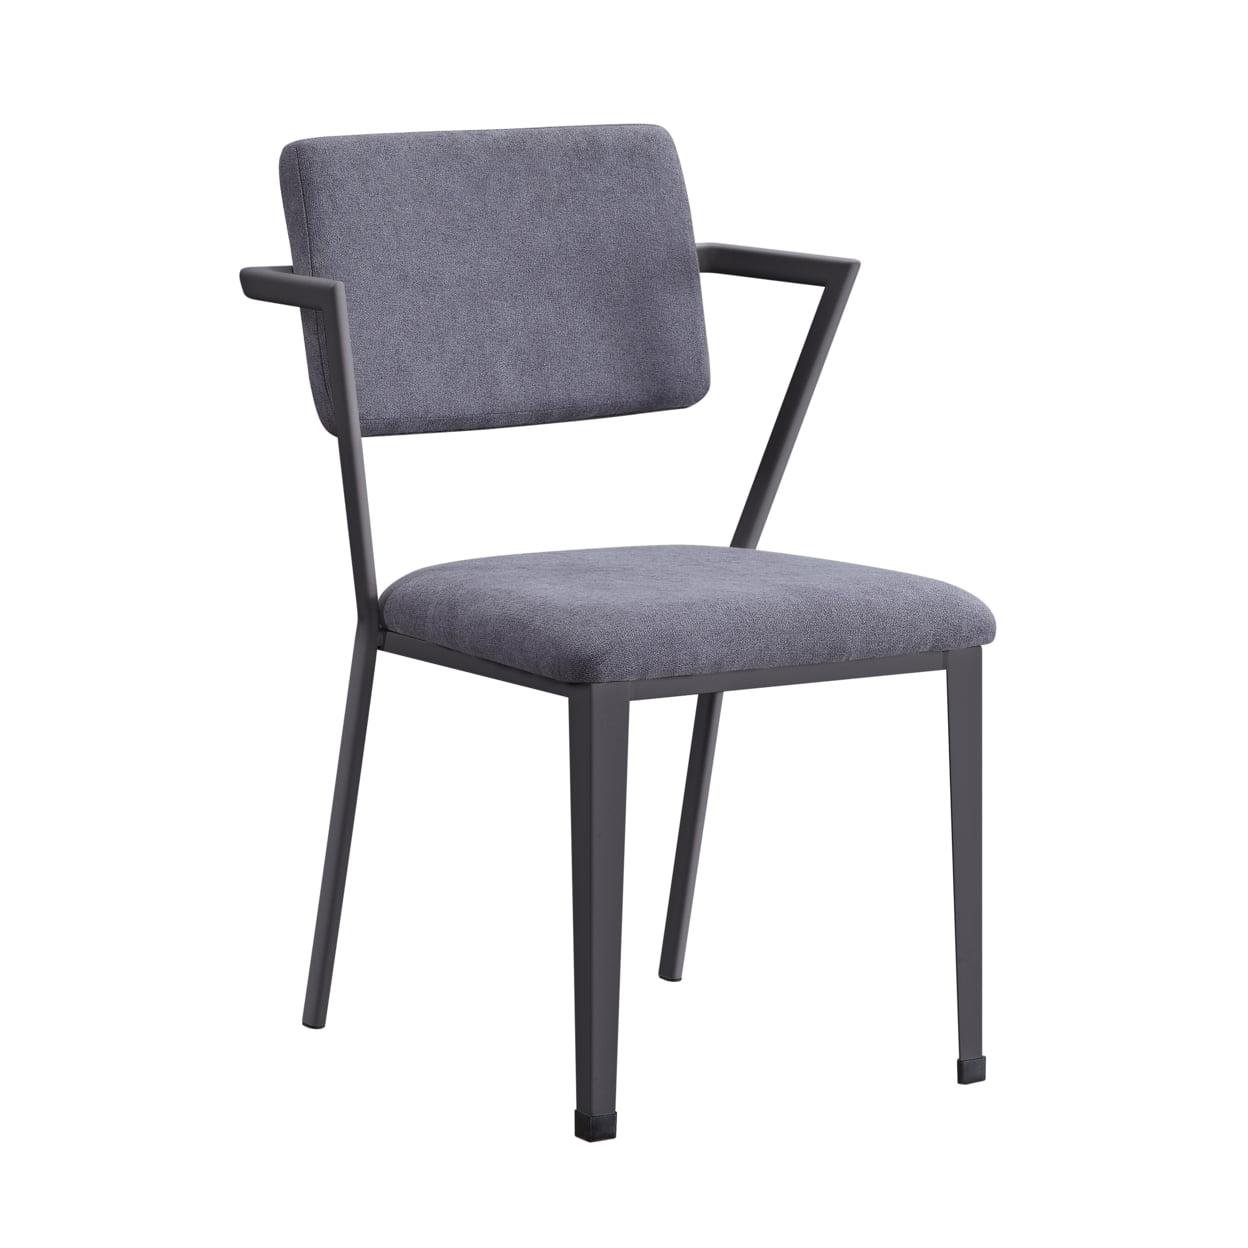 Industrial Gray Gunmetal Metal Chair with Fabric Upholstery